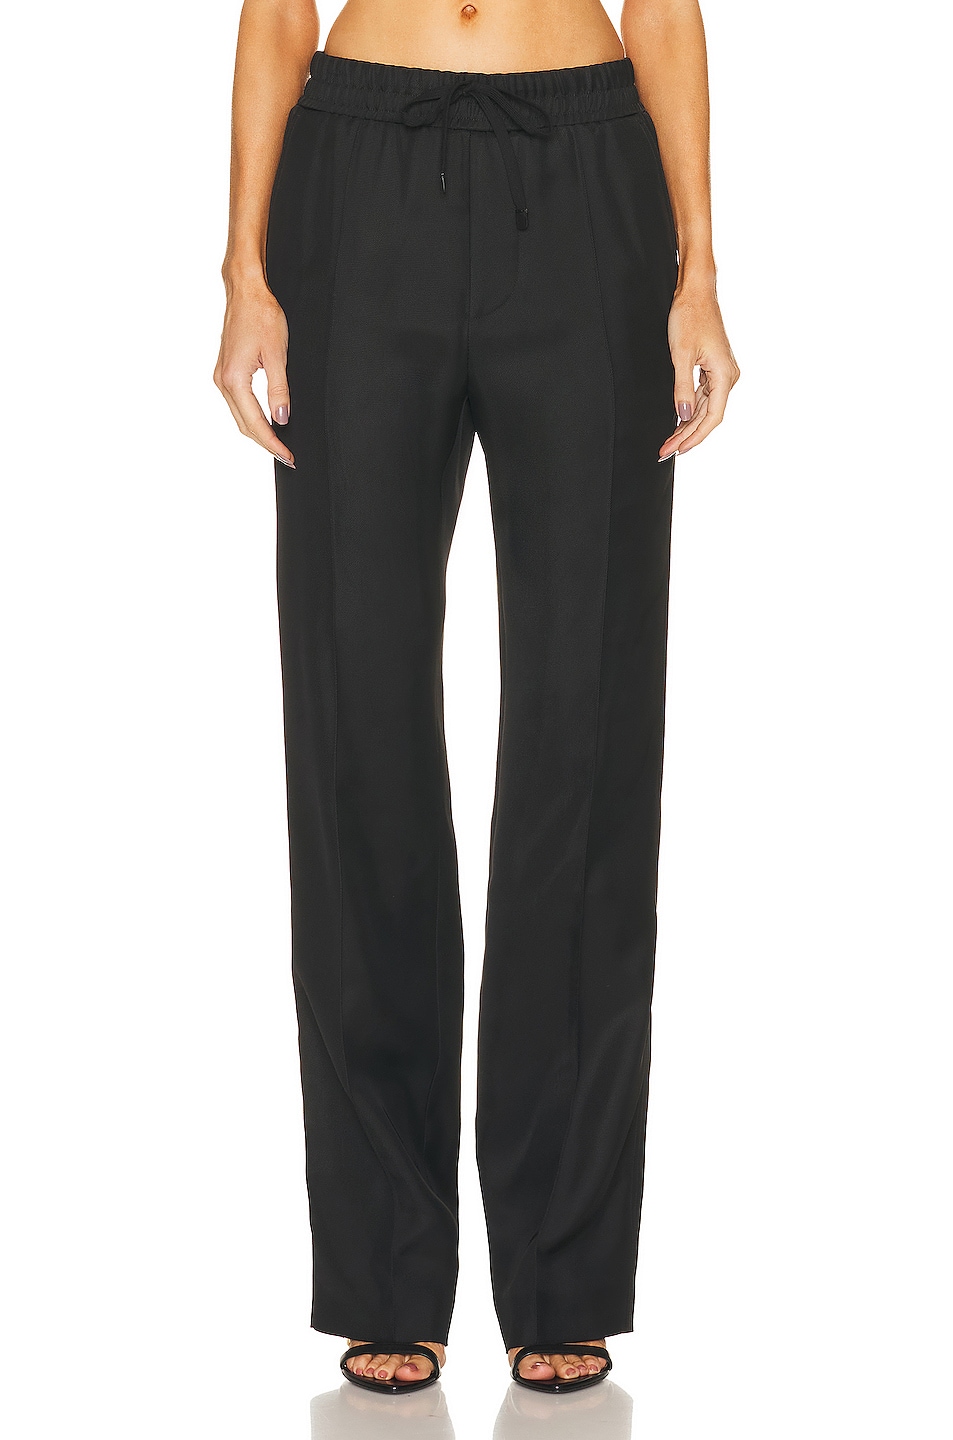 TOM FORD Tailored Jogger in Black | FWRD